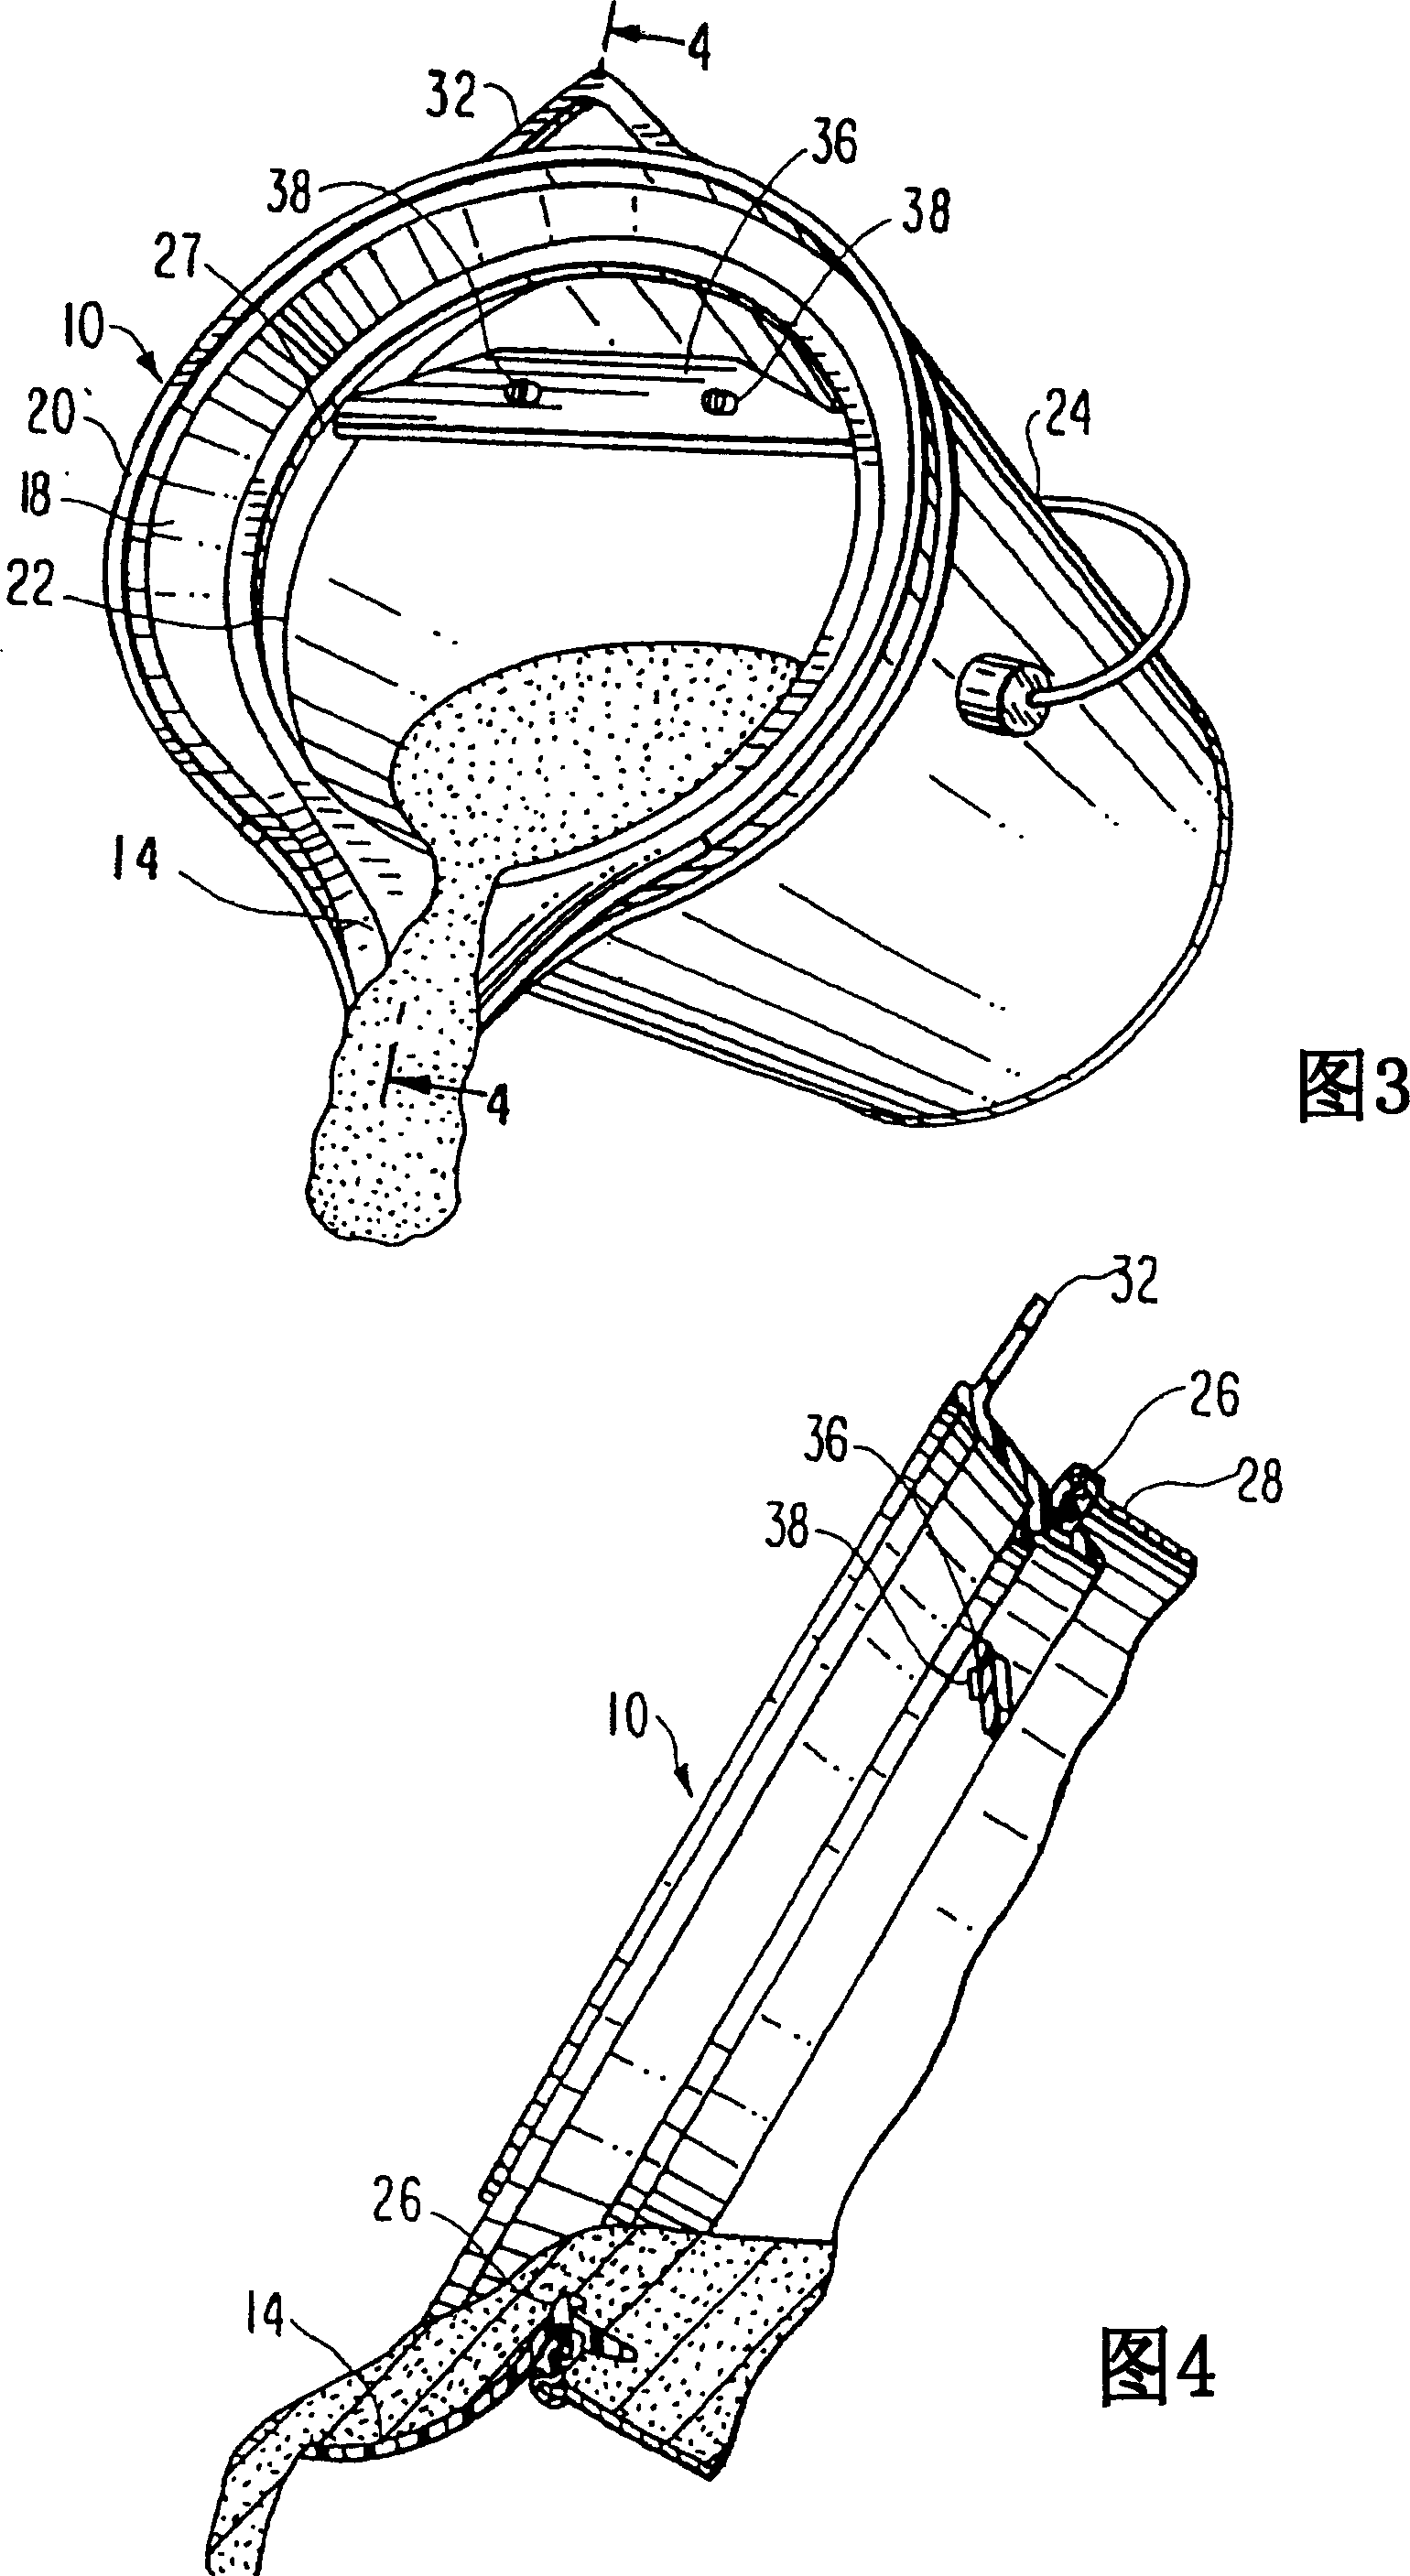 Multifunction pouring spout with handle